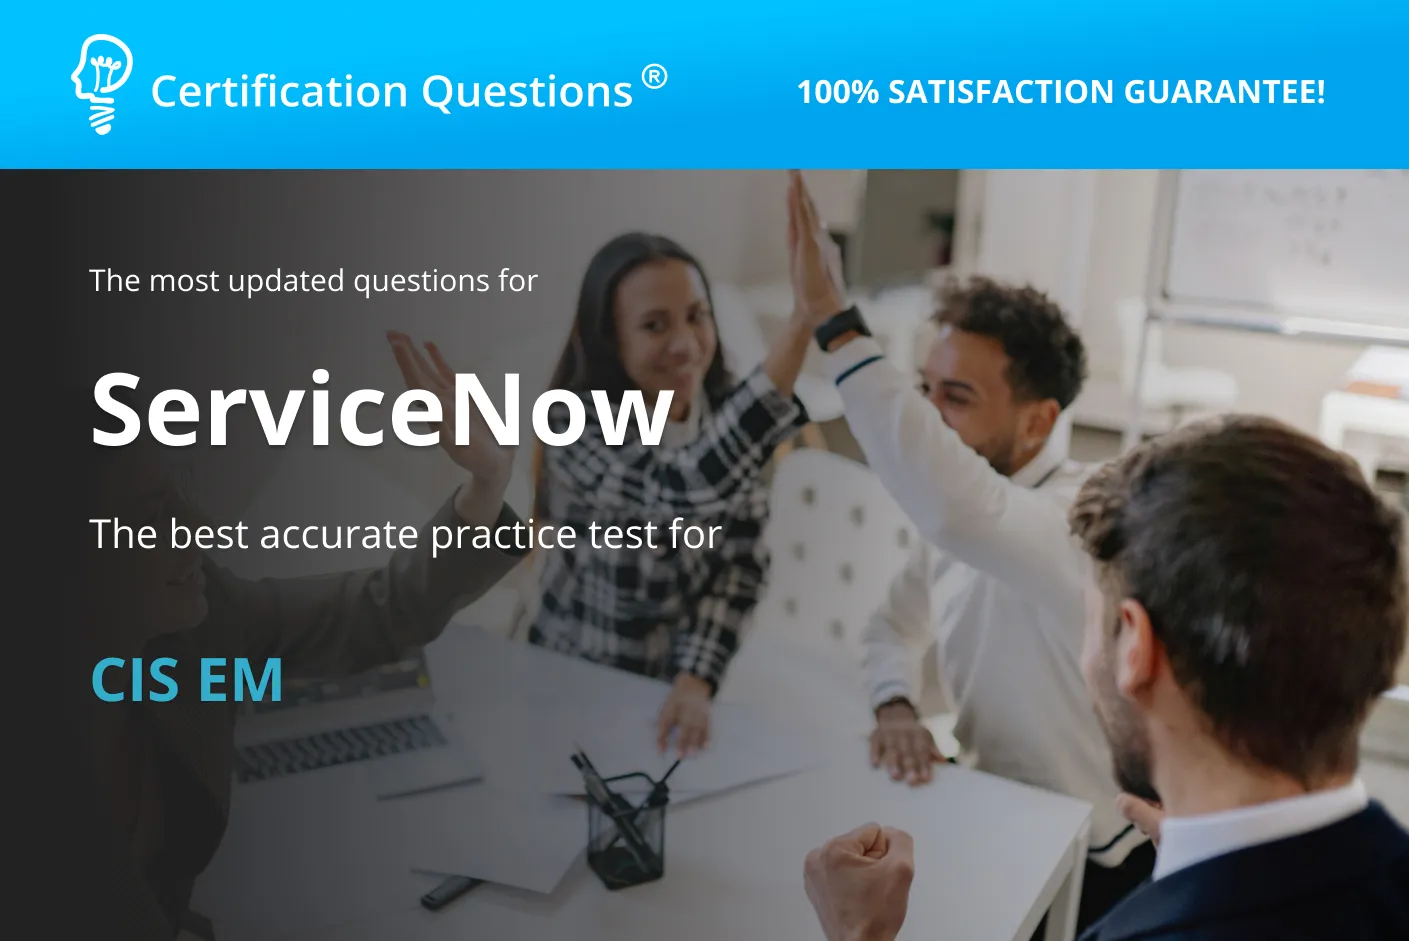 Here is the image for the Event Management ServiceNow exam questions in the United States of America.